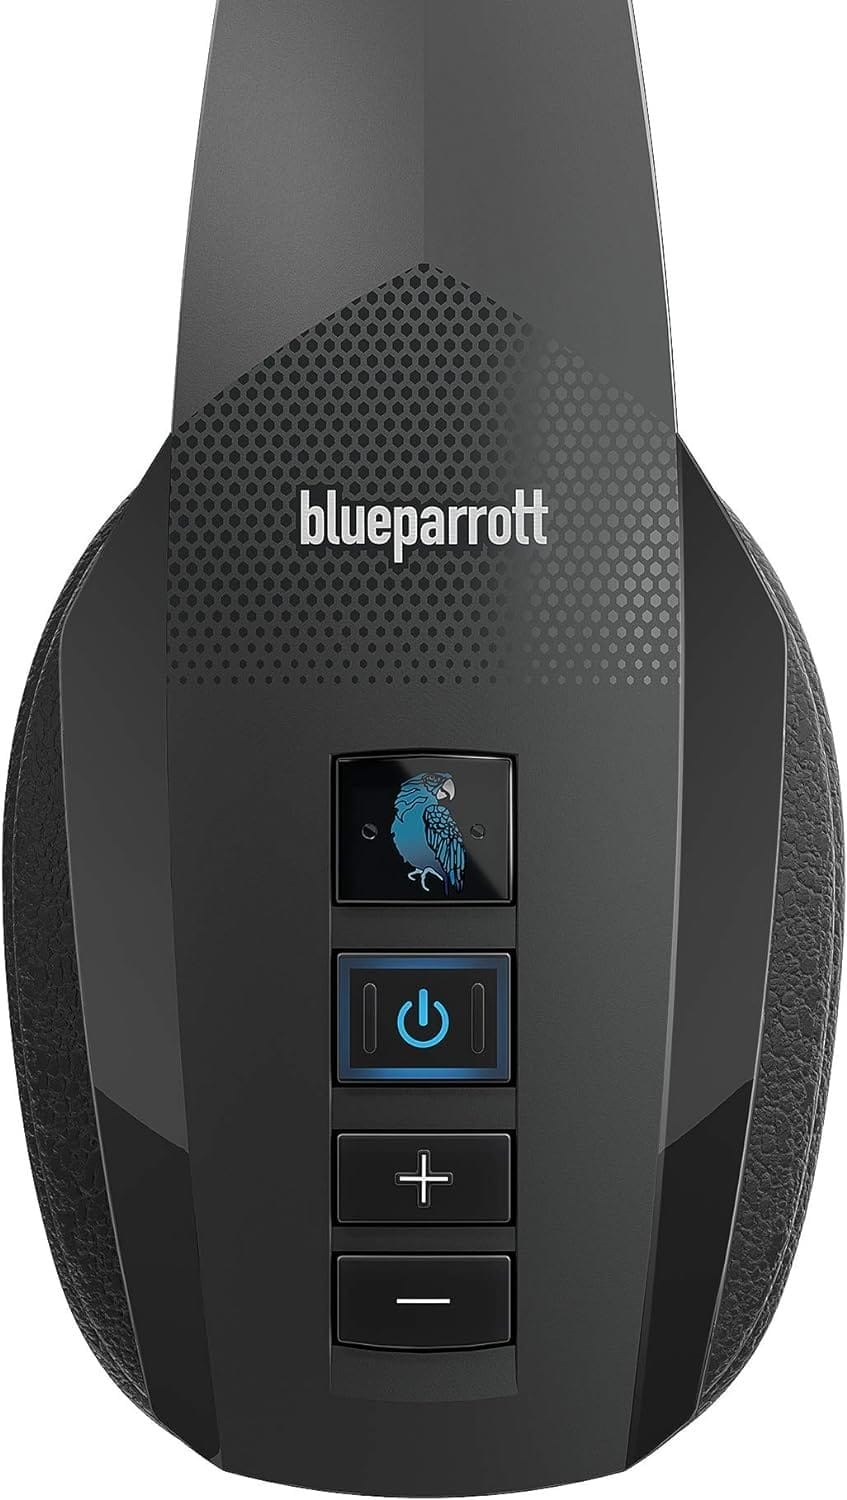 BlueParrott B450-XT Noise Cancelling Bluetooth Headset – Updated Design with Industry Leading Sound  Improved Comfort, Up to 24 Hours of Talk Time, IP54-Rated Wireless Headset,Black